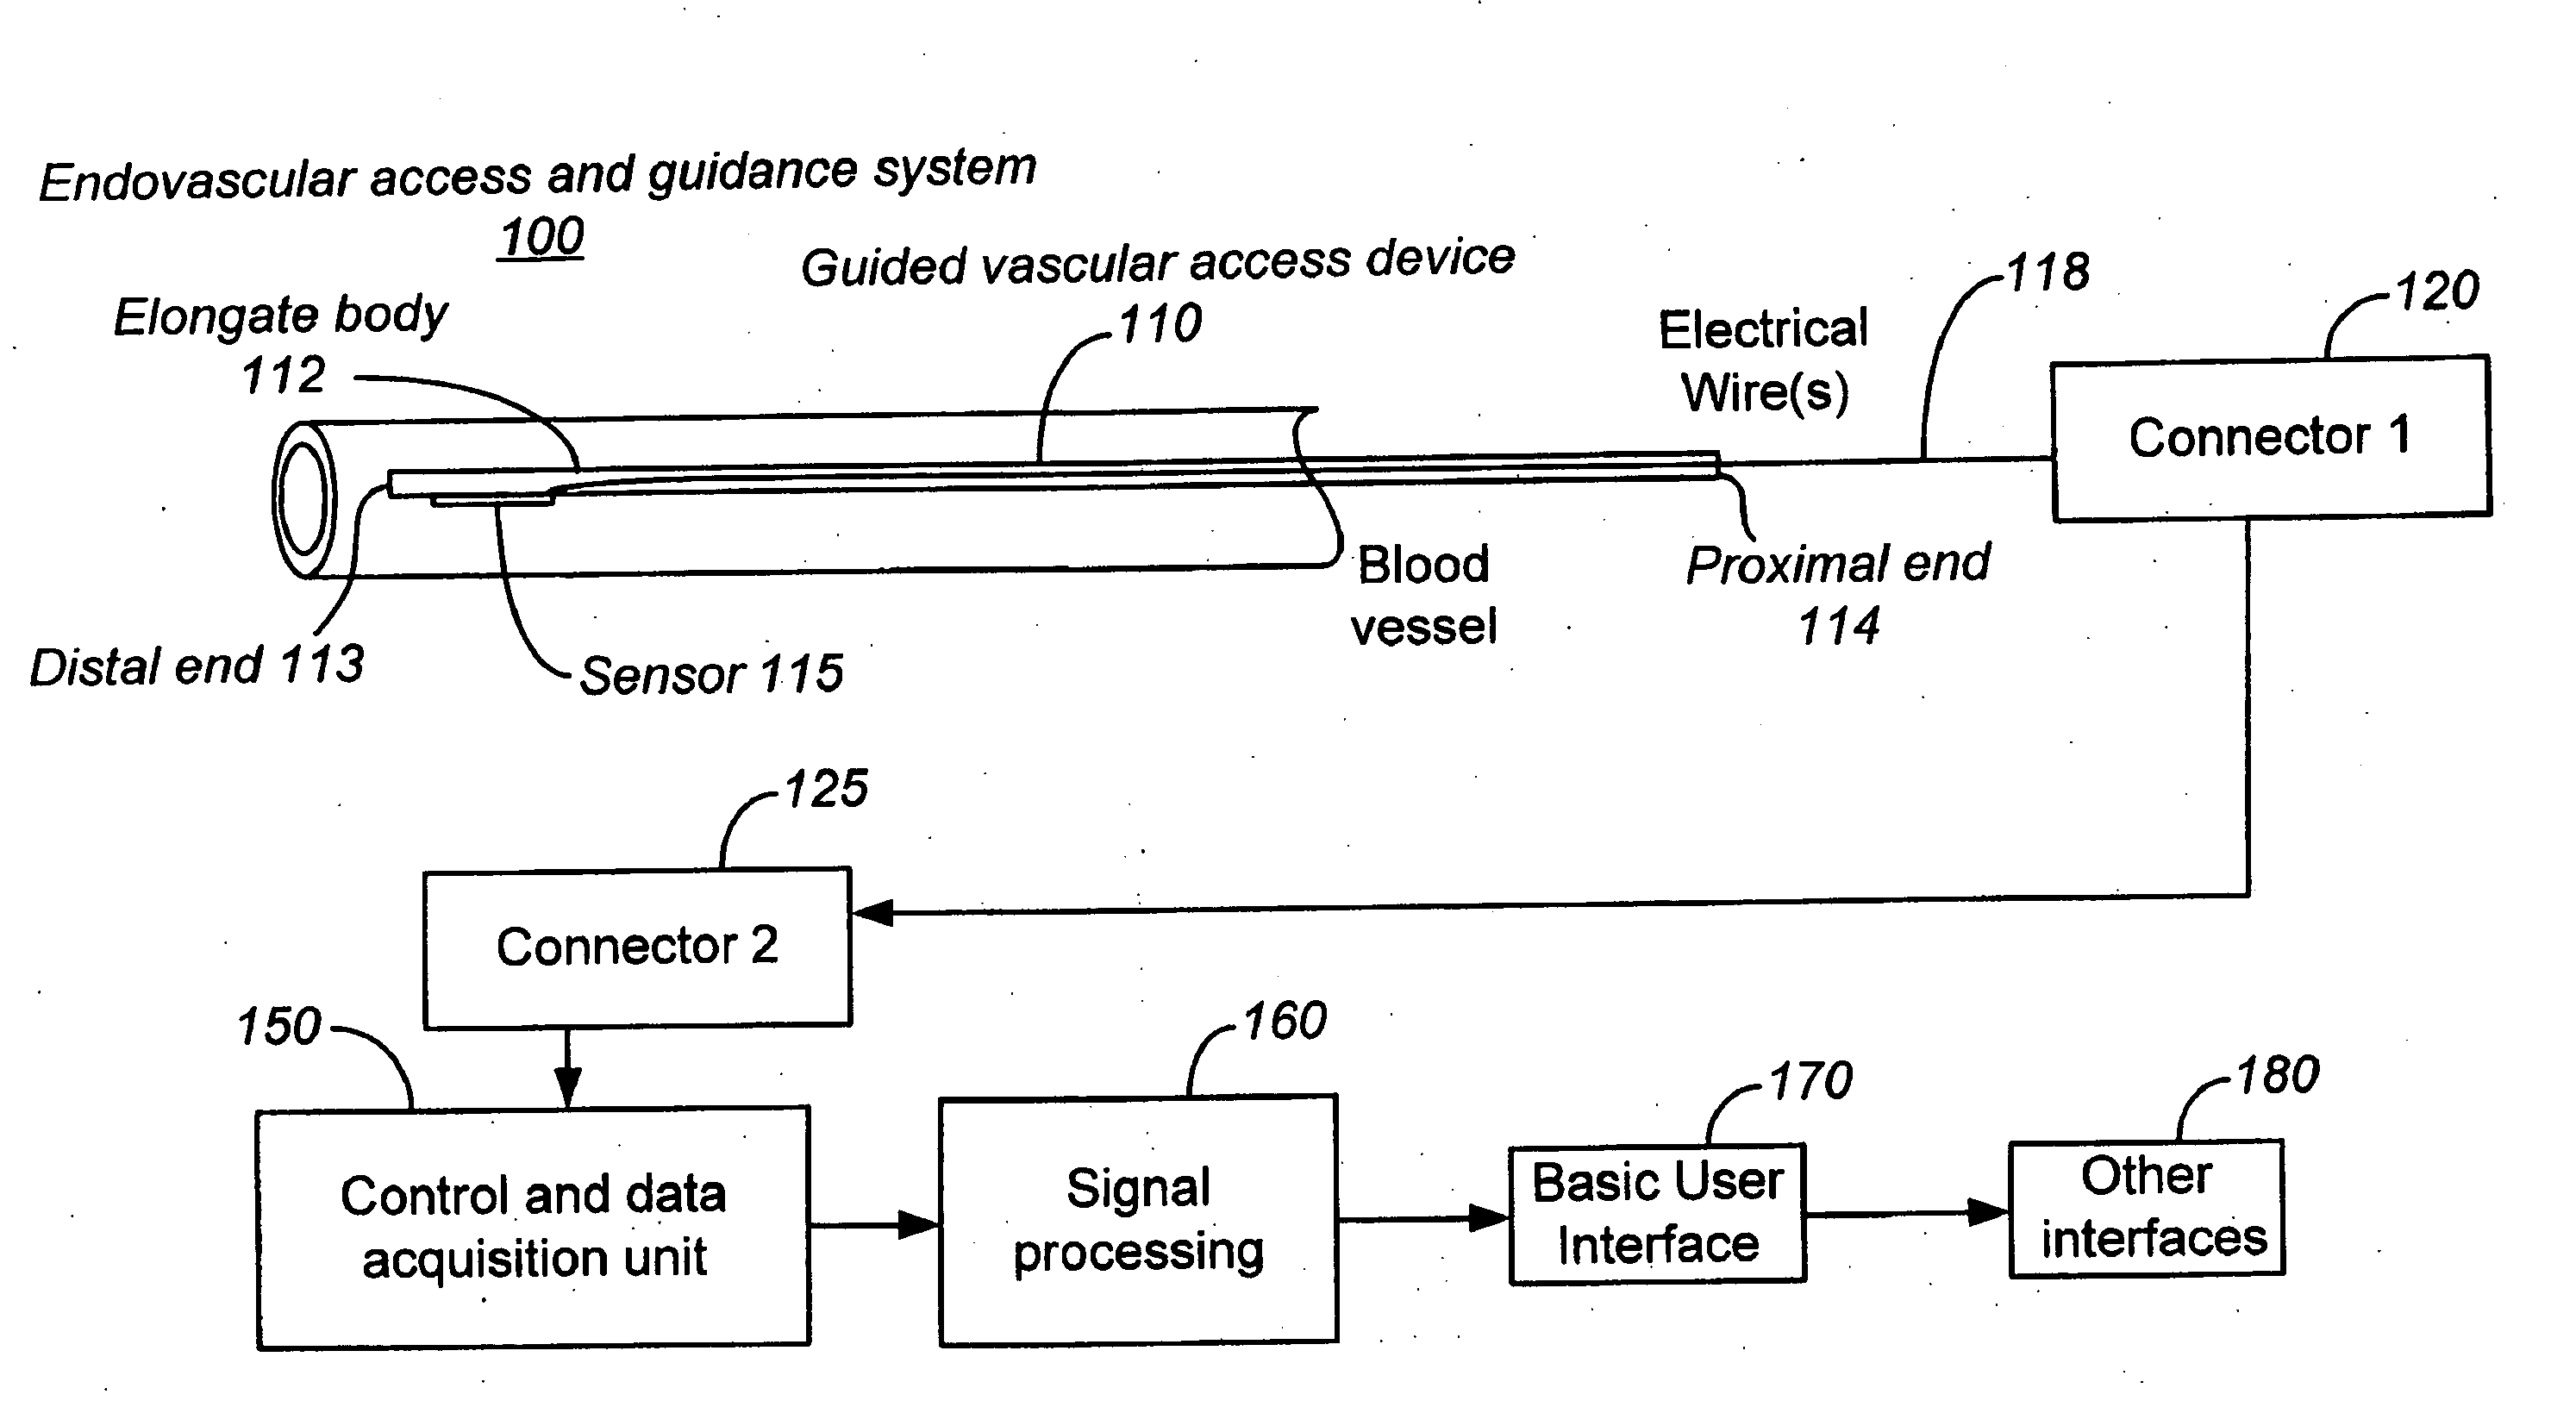 Endovenous access and guidance system utilizing non-image based ultrasound